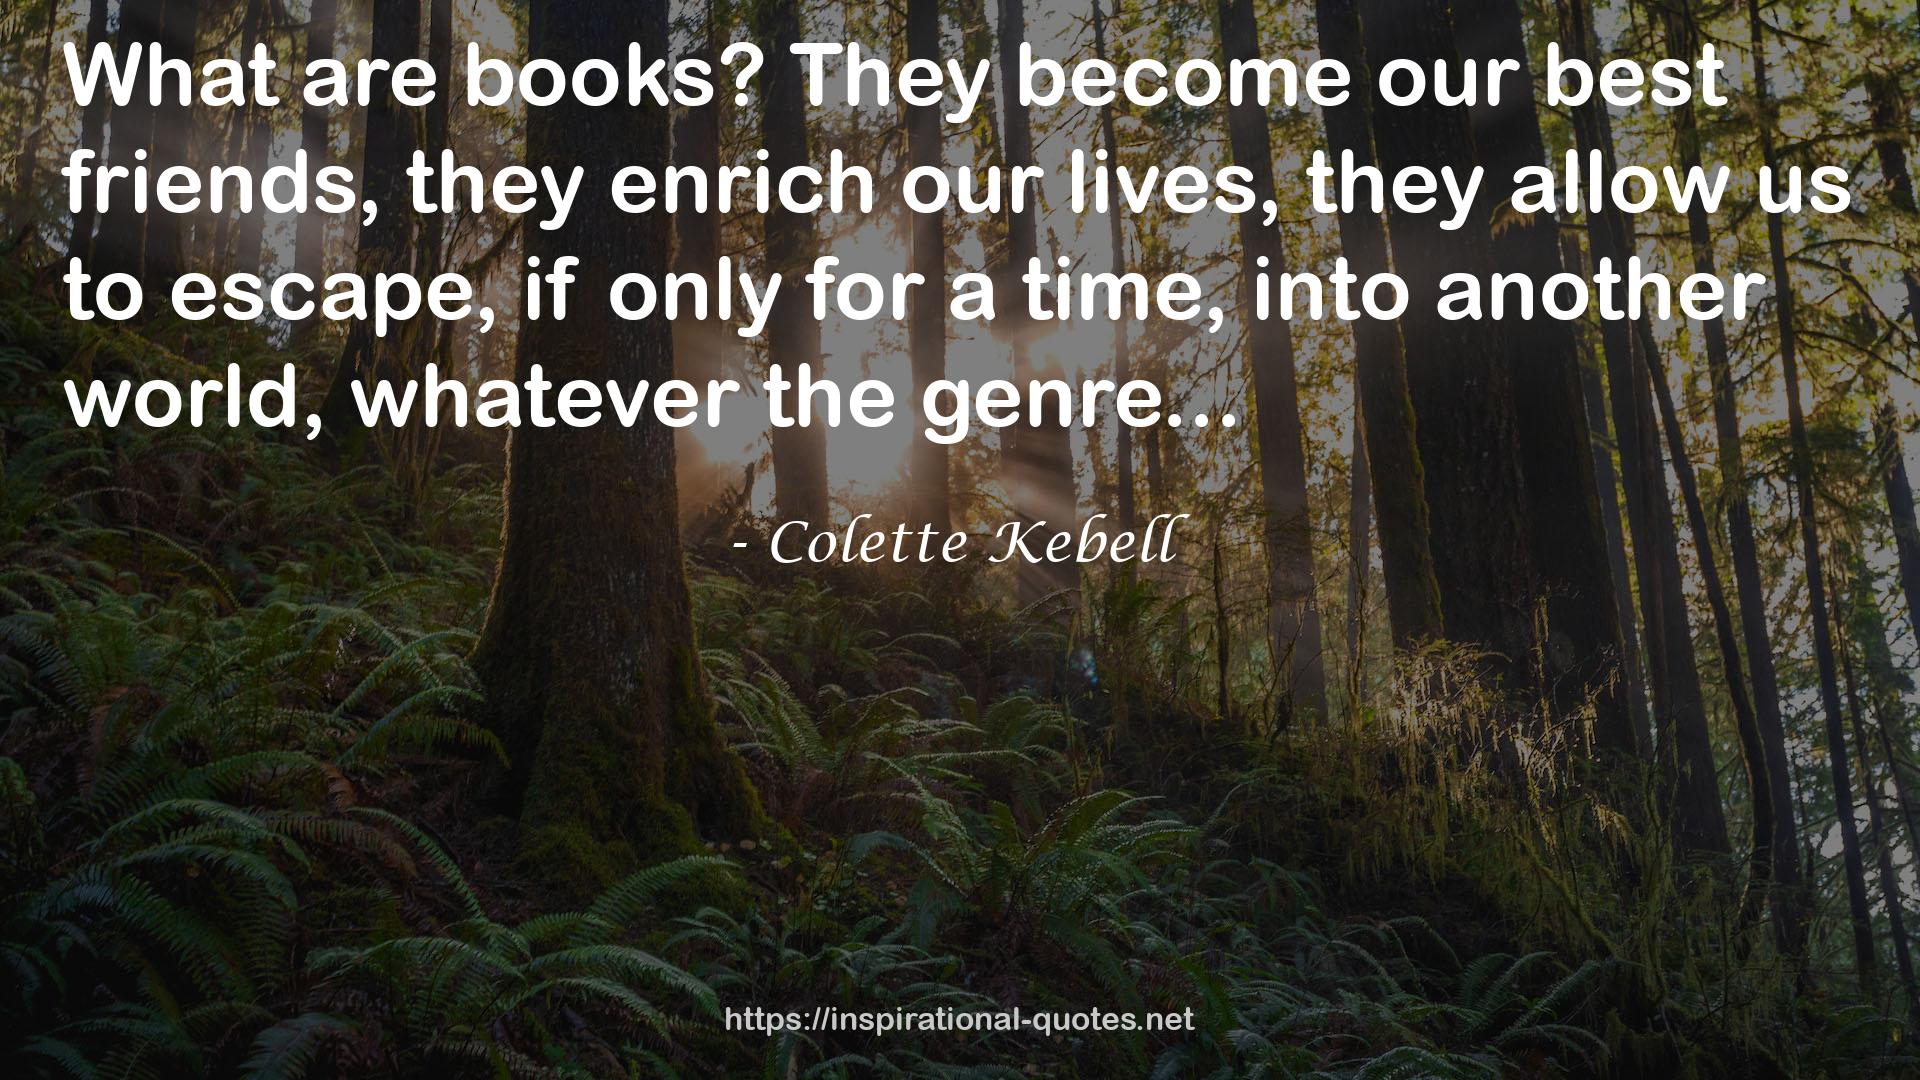 Colette Kebell QUOTES